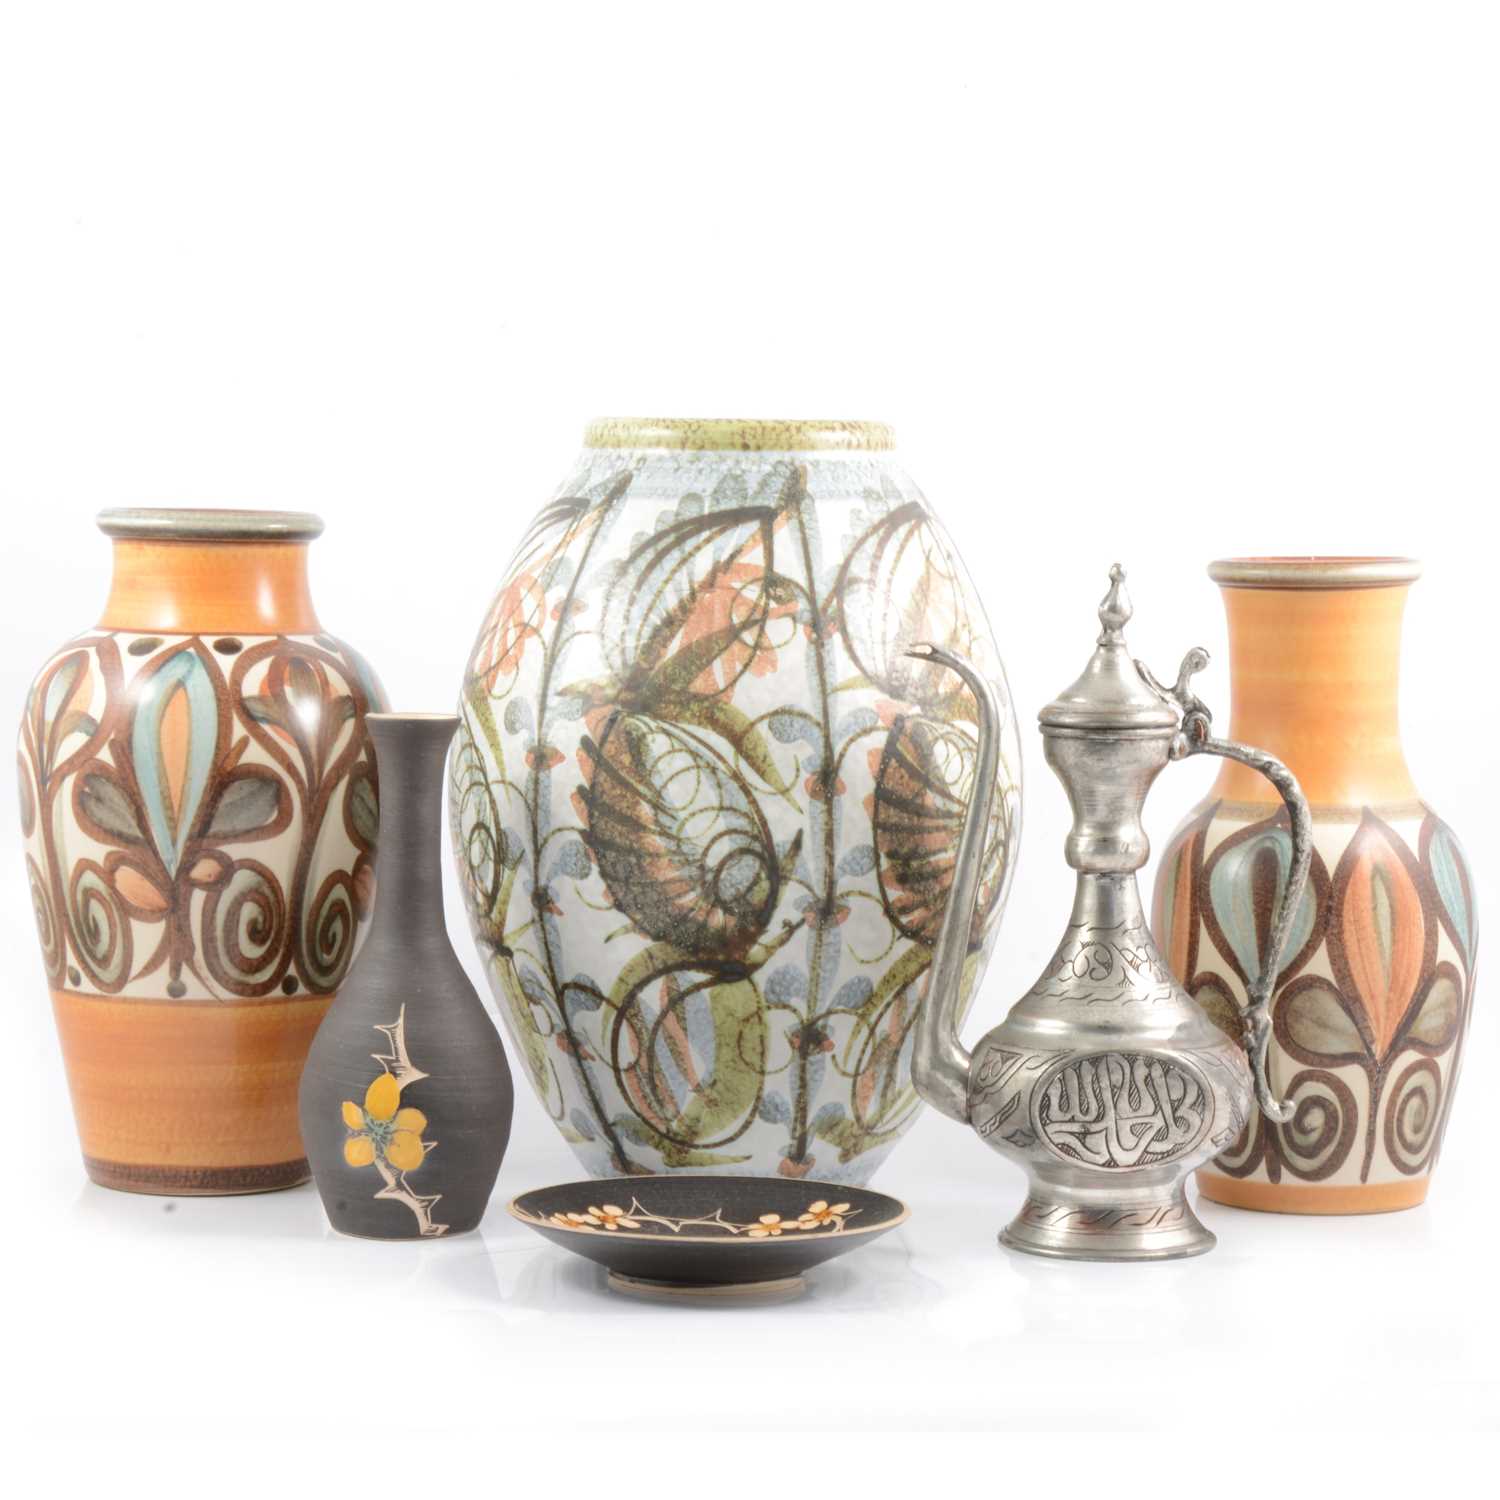 Lot 4 - Denby and Langley Glyn Colledge vases, plus other ceramics.